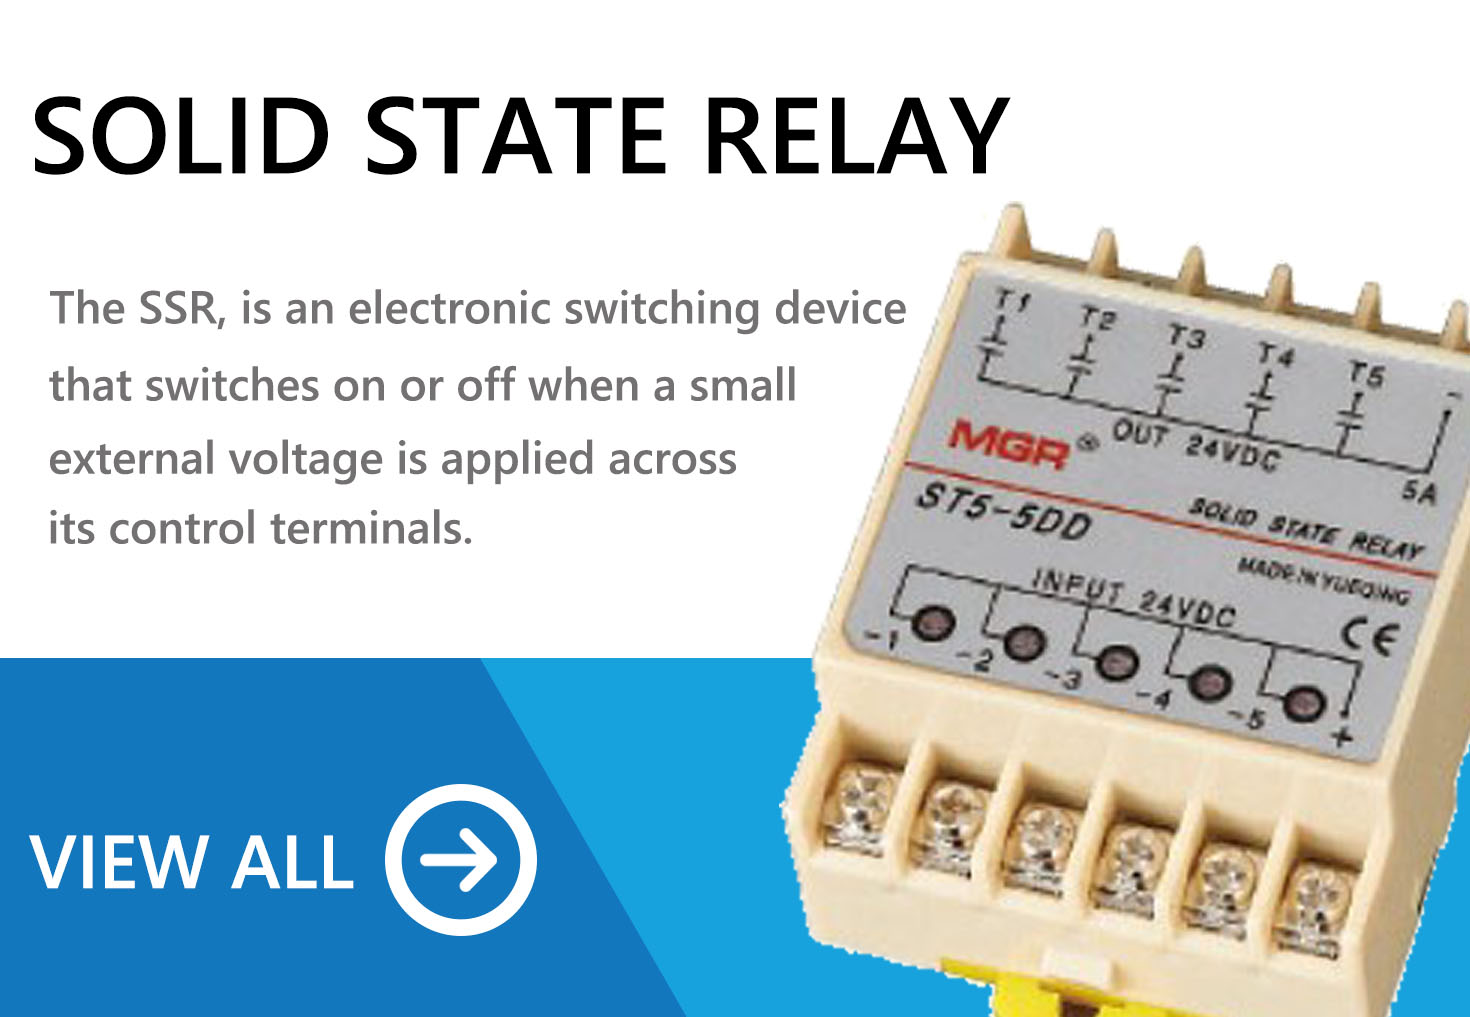 The details of Mager MGR special solid state relay. SSR circuit diagram, ssr relay switch product pdf, SSR voltage current phase parameter